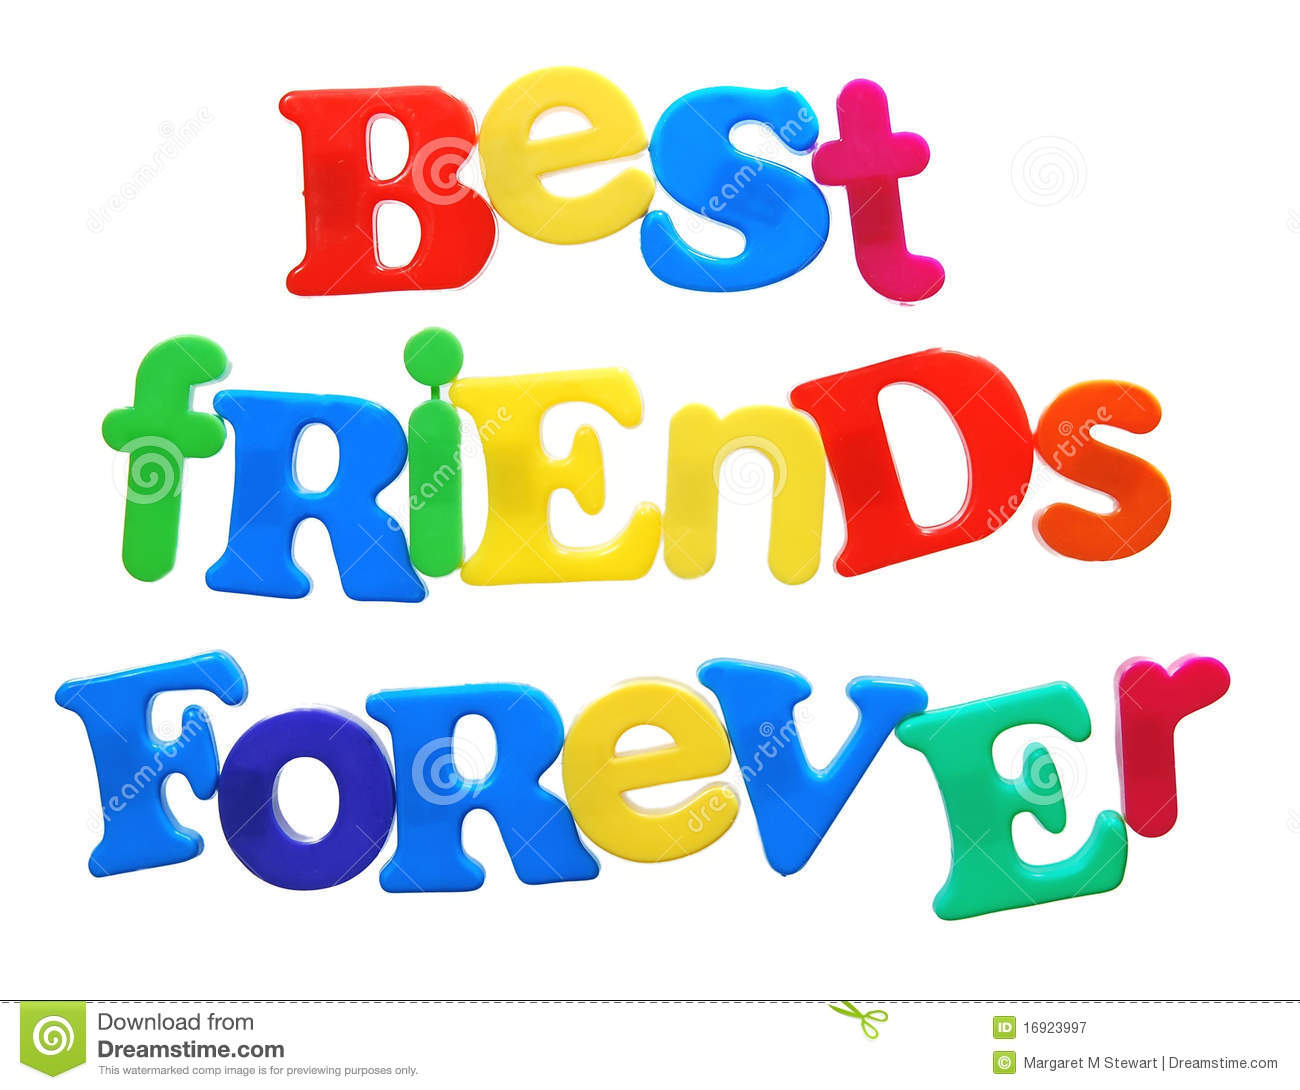 best friends forever free download